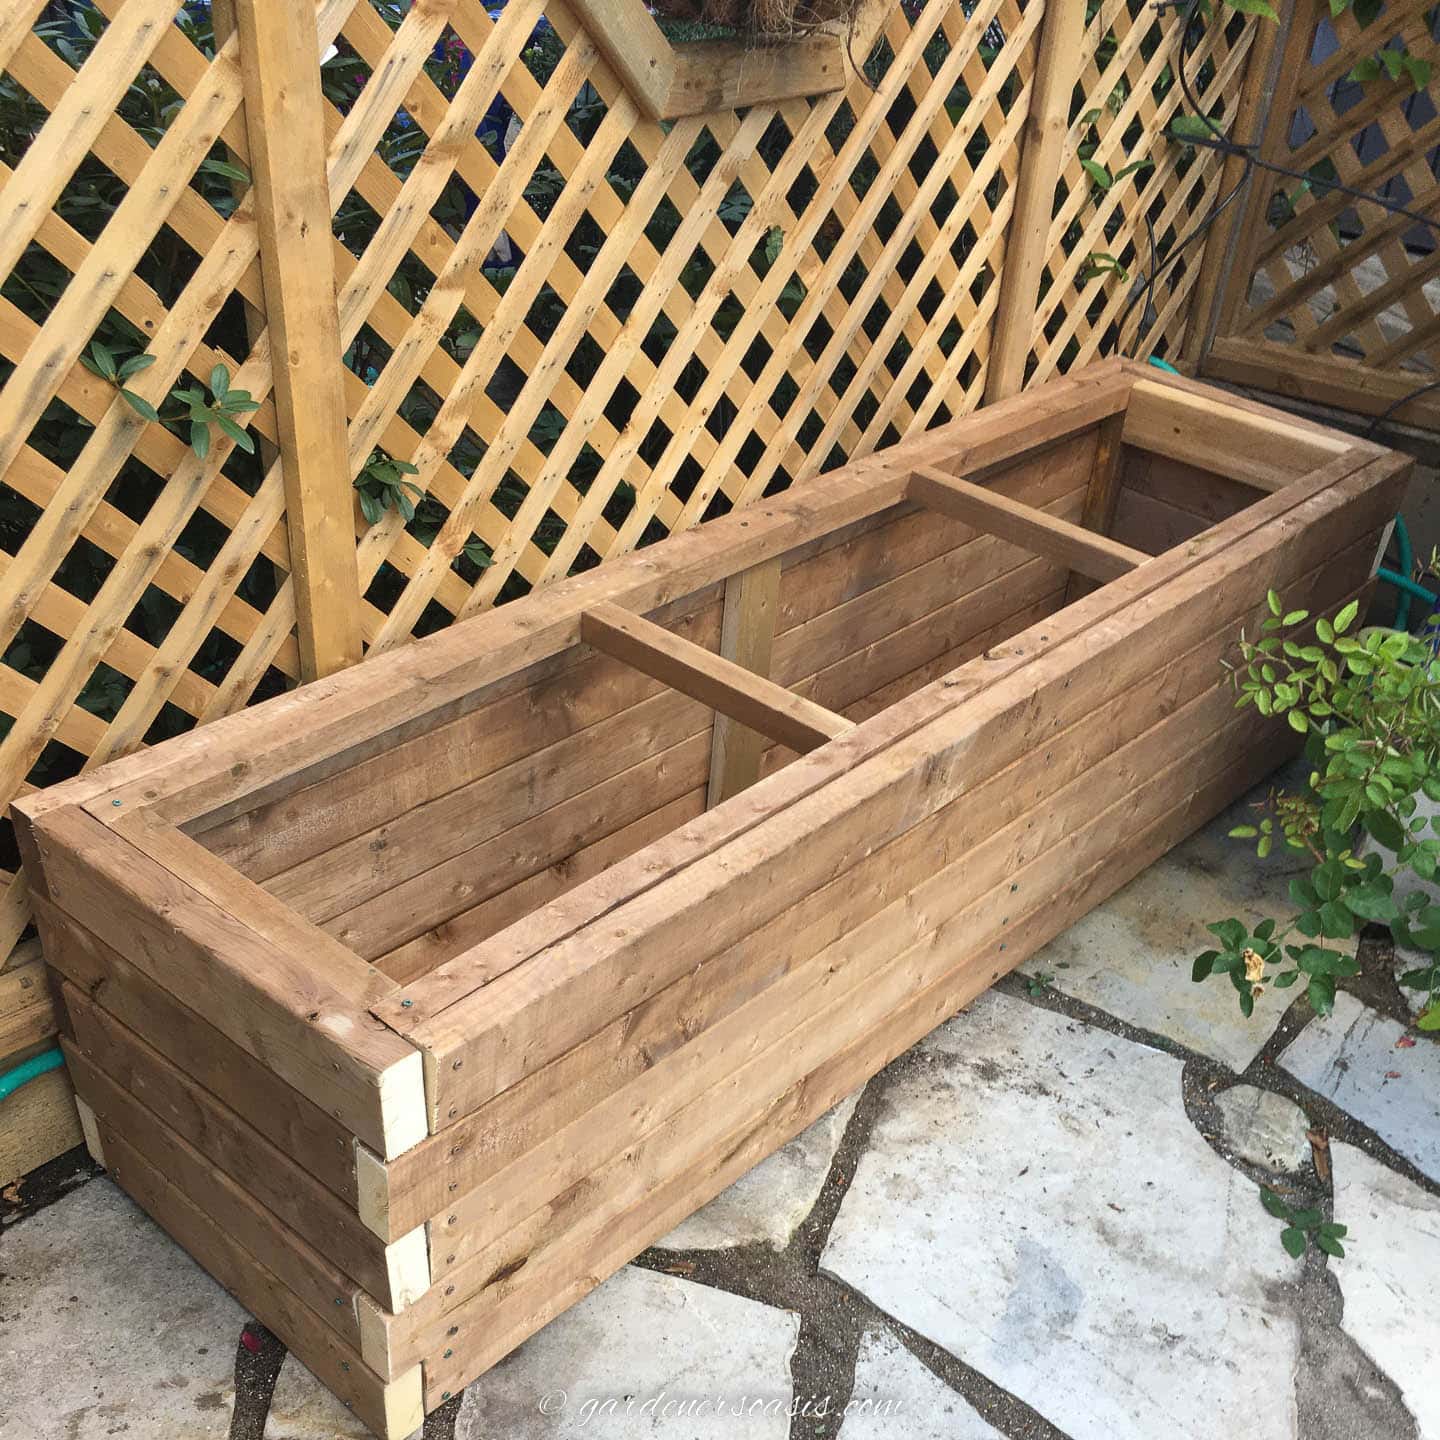 Finished DIY planter box in front of a fence